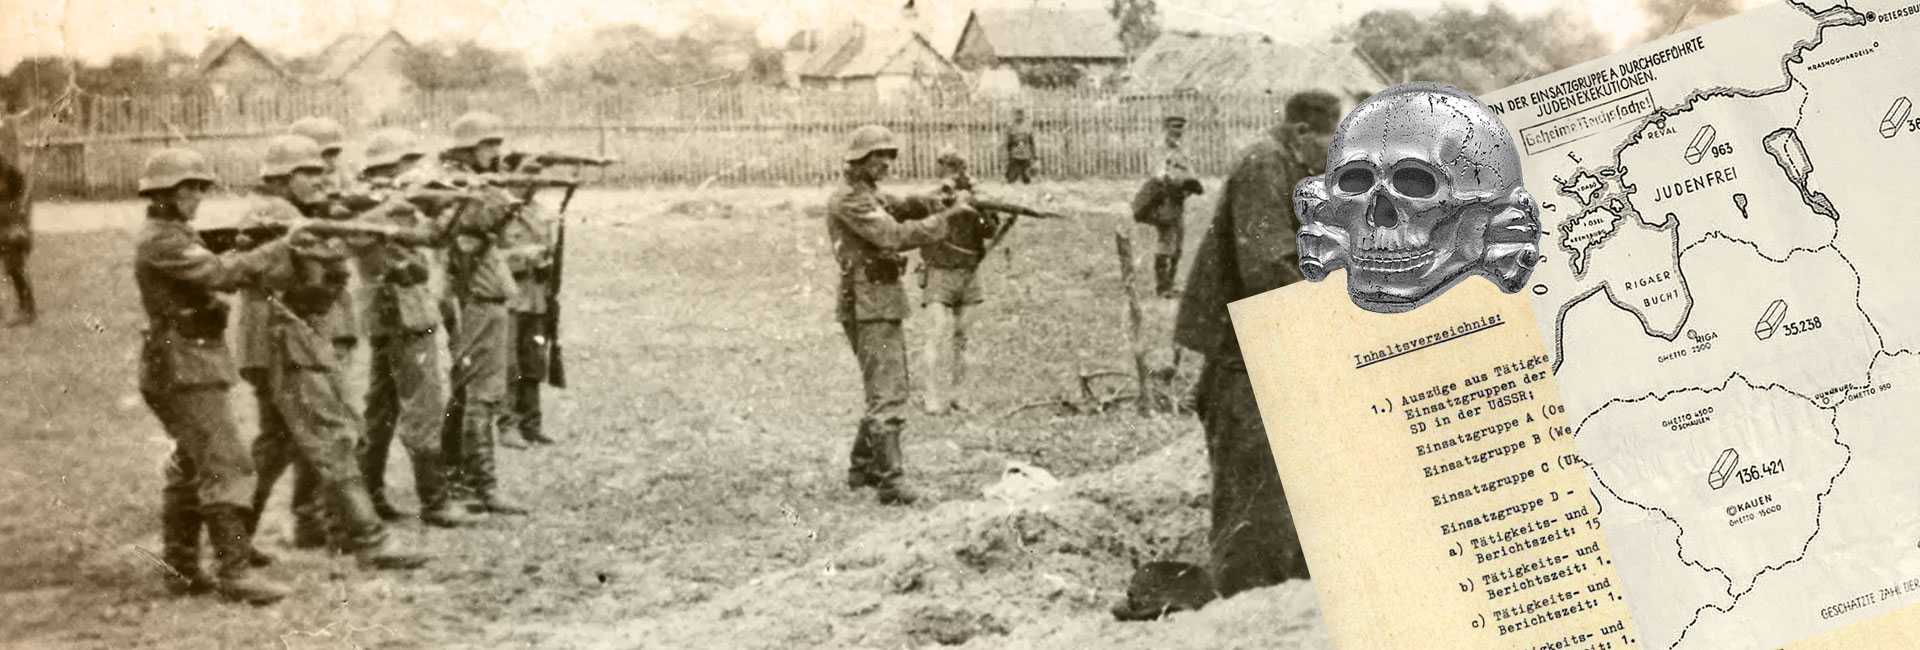  History and Facts of the Einsatzgruppen or Nazi Death Squads